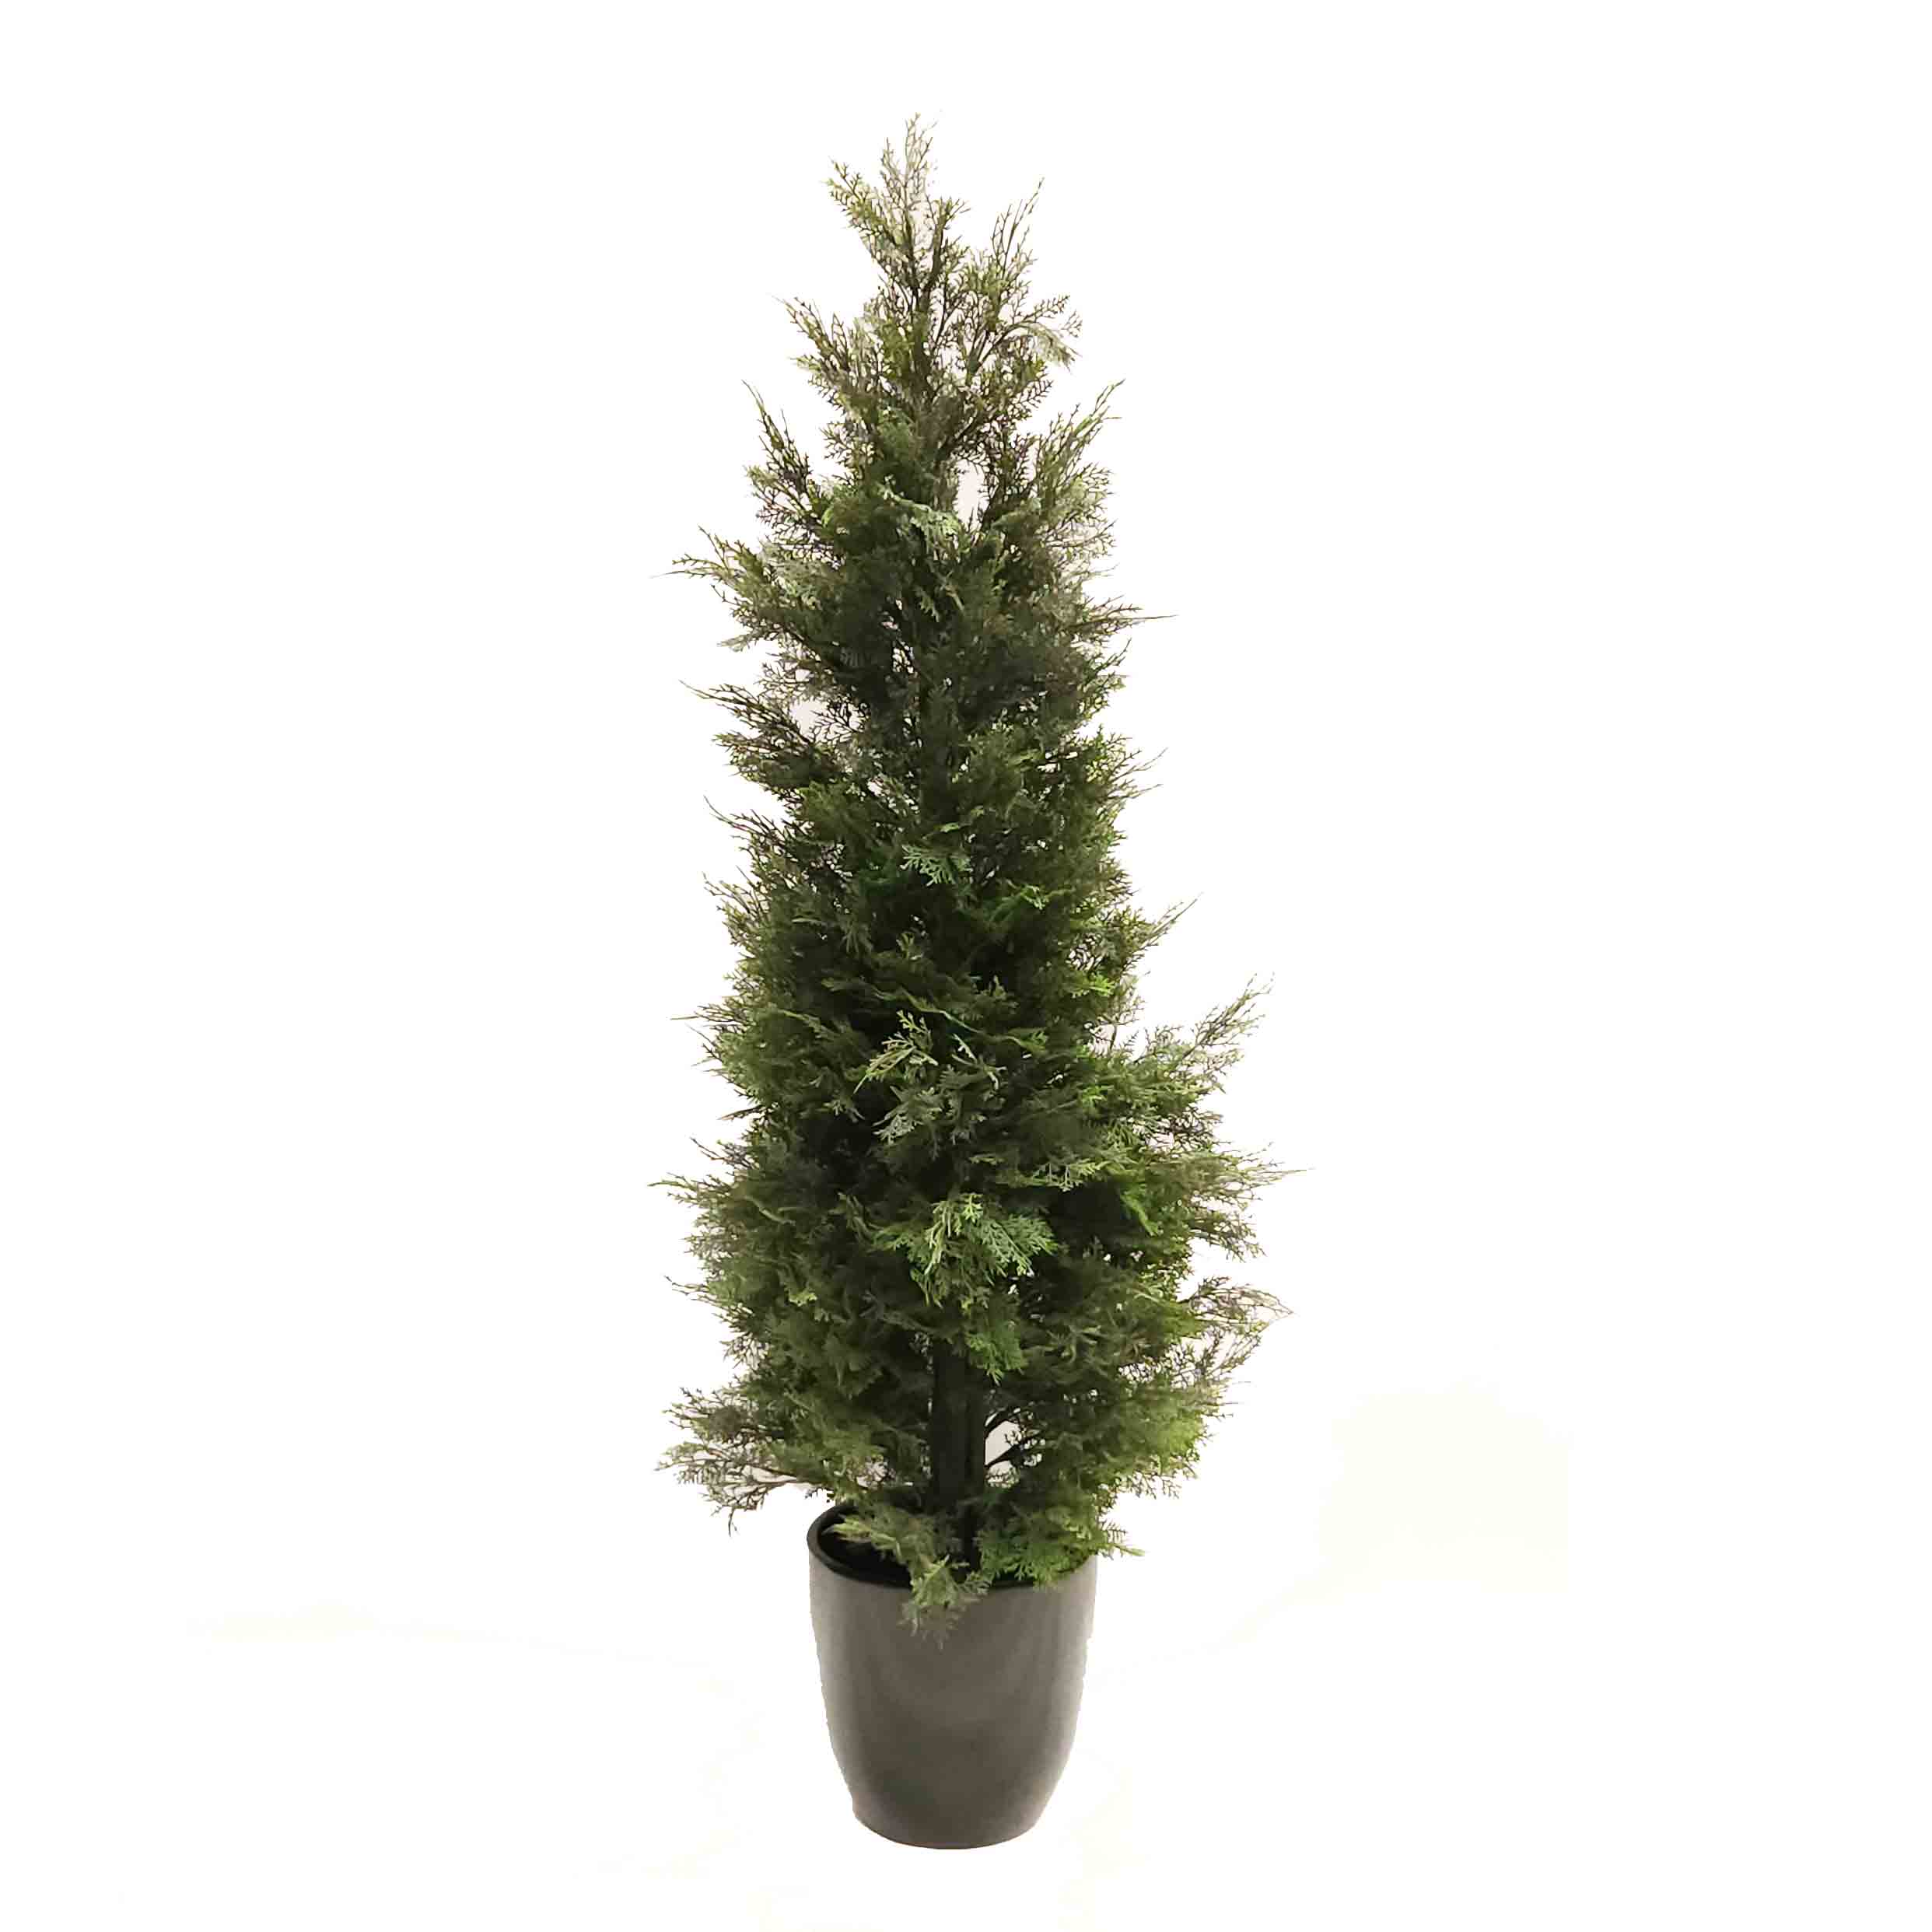 artificial outdoor plant | cypress tree | conifer tree | fake cypress tree | artificial conifer tree | UV treated plants | faux cypress tree | artificial plants